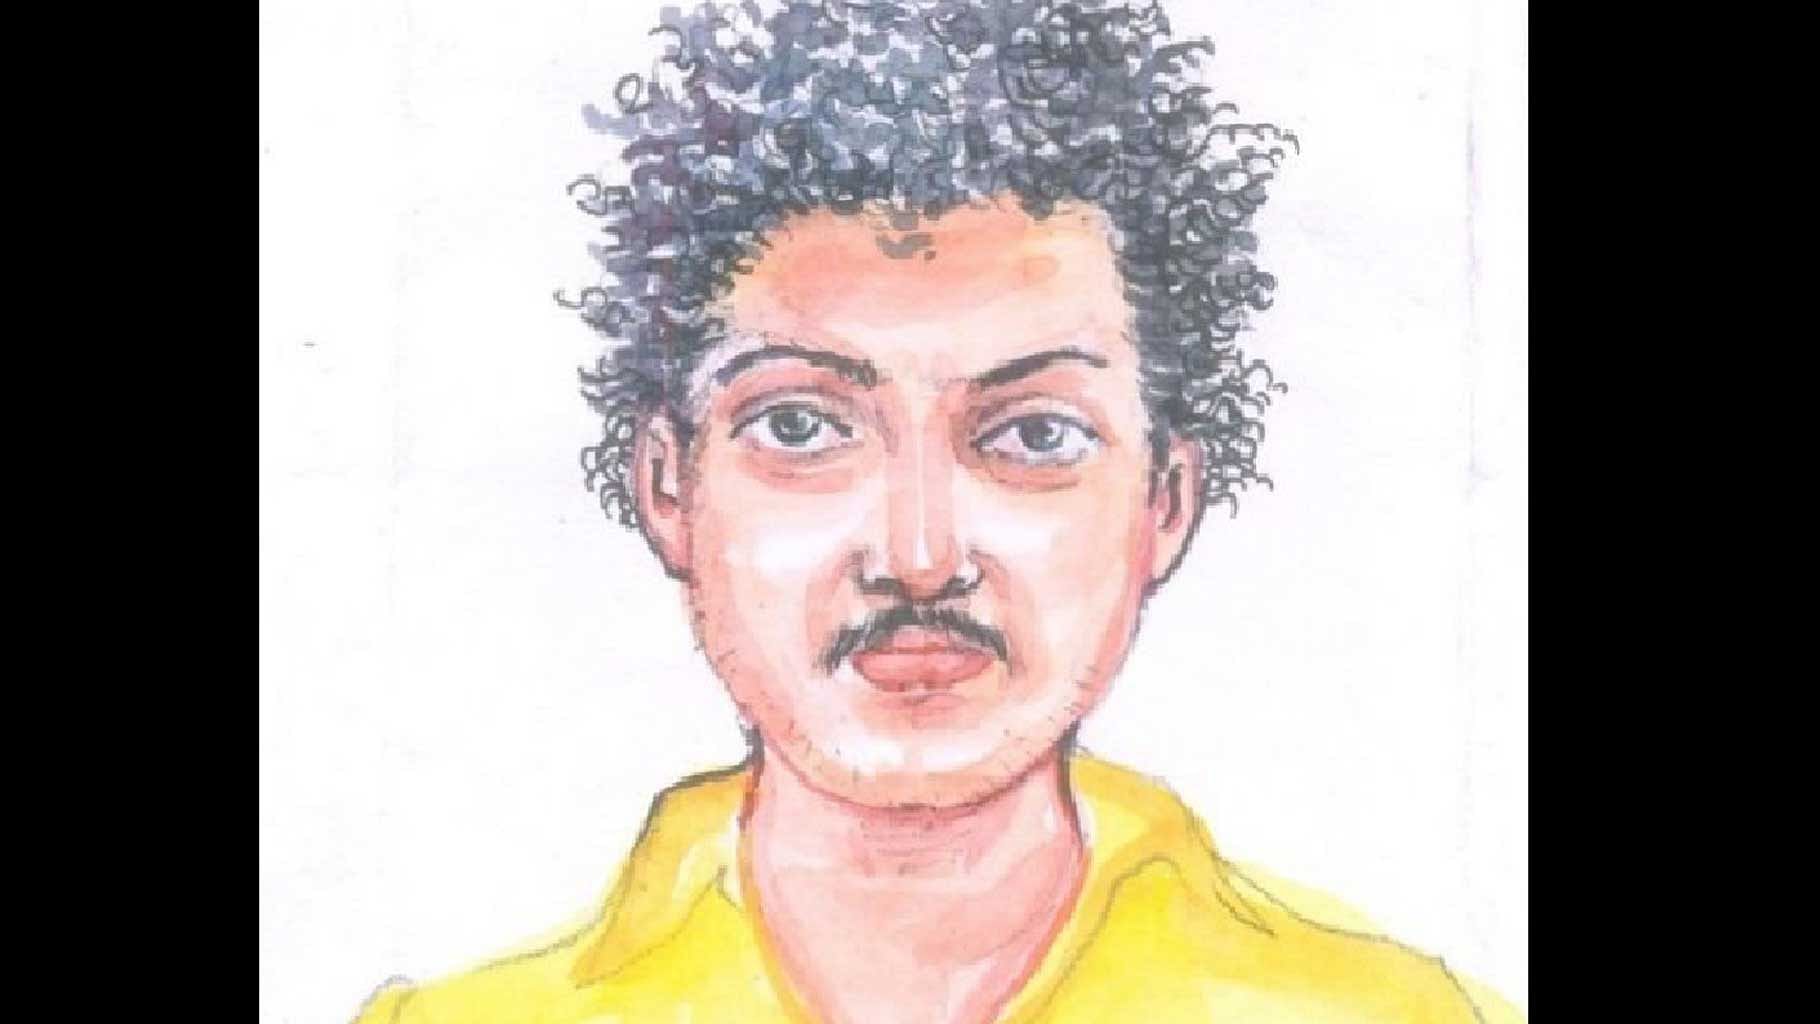 Hours after the drawing was put out in public domain, the photograph of a Kerala man, who many thought bore similarities with the sketch, started doing rounds on social media. (Photo: <i>The News Minute</i>)